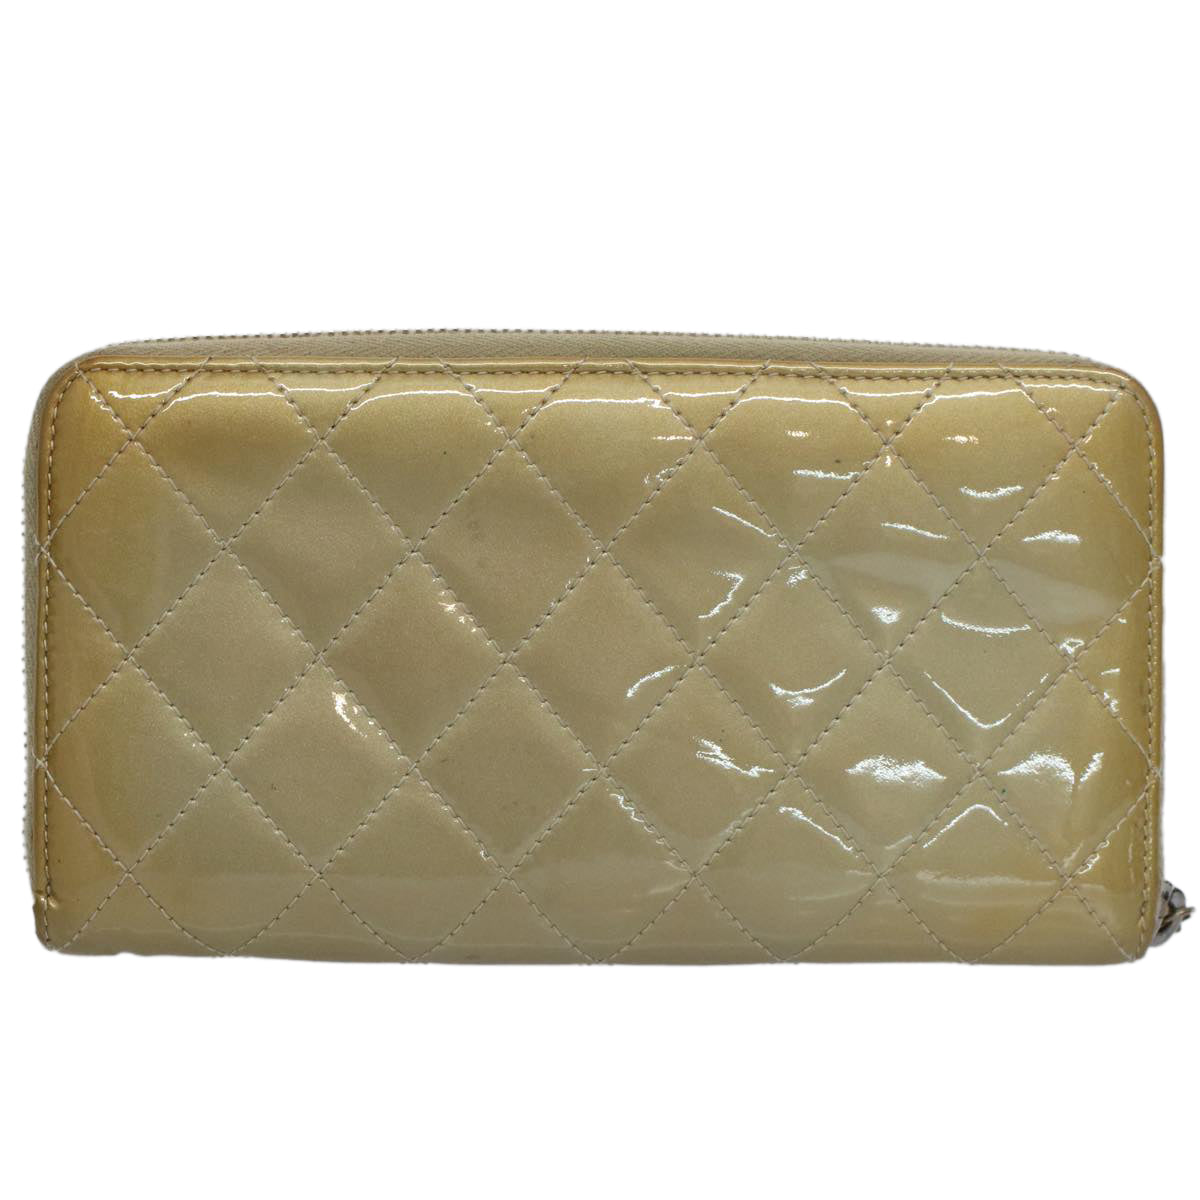 CHANEL Matelasse Long Wallet Patent leather Gold Tone CC Auth 57357 - 0